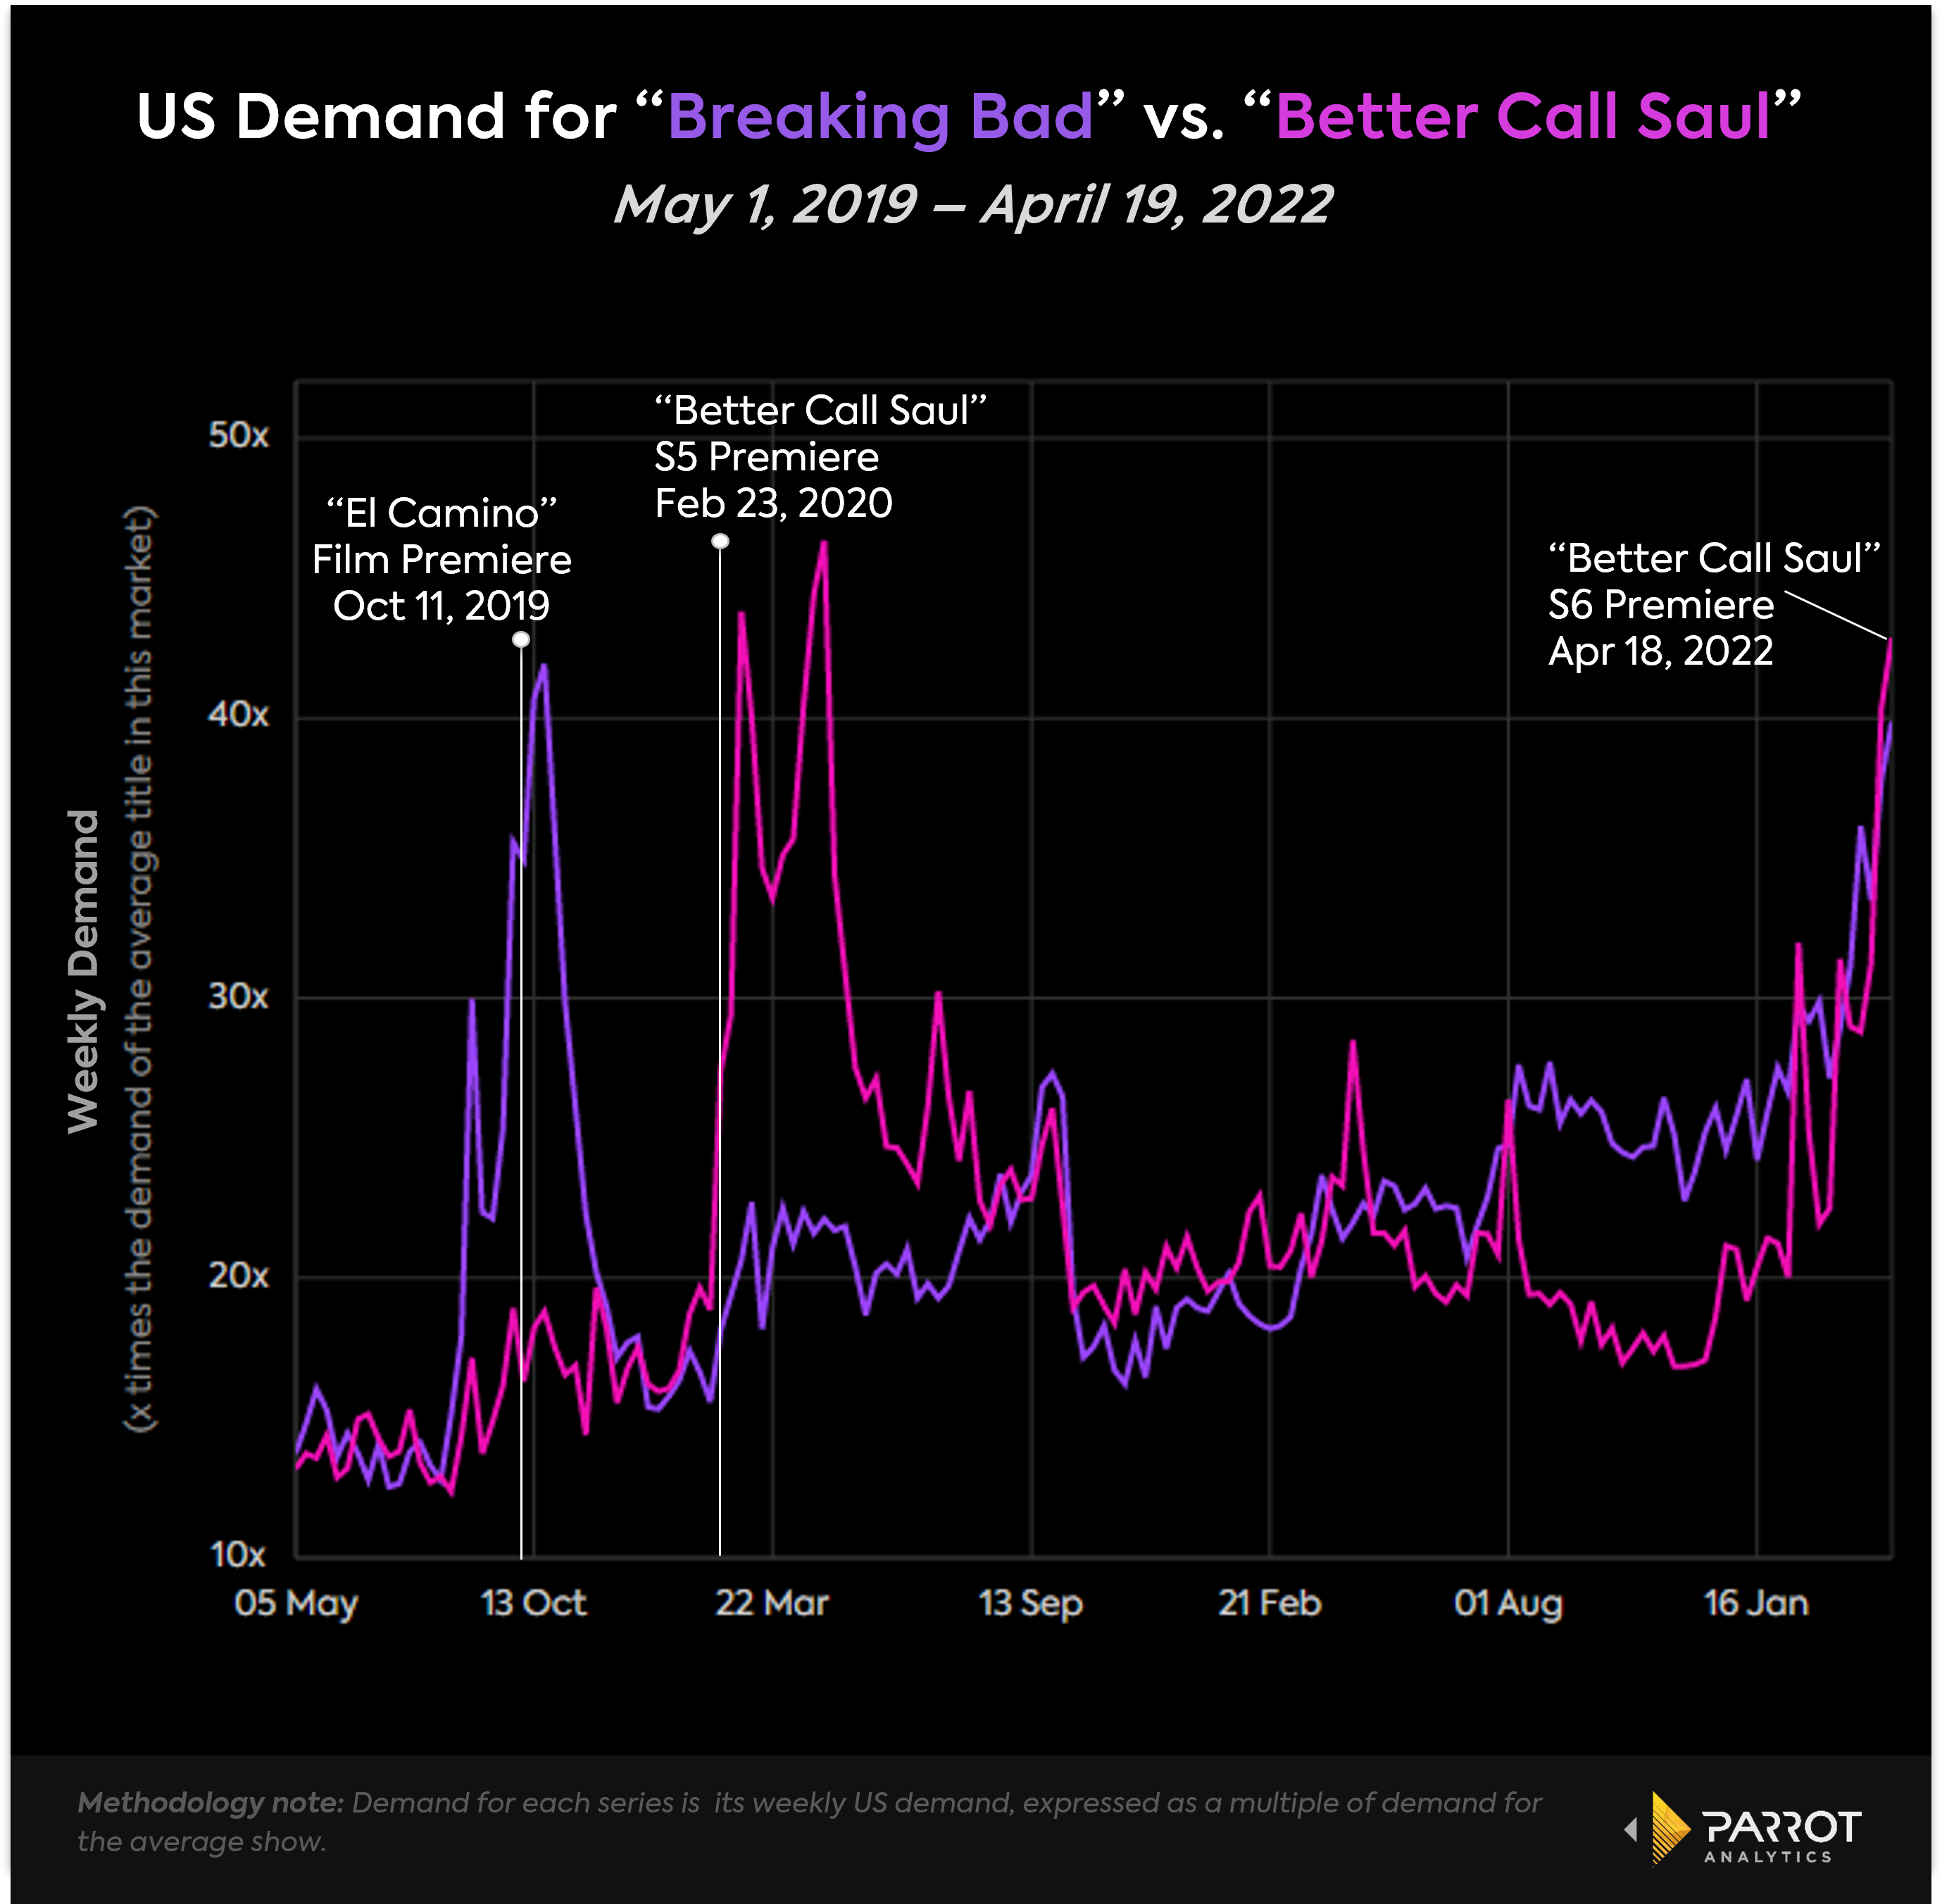 Better_call_saul_vs_breaking_bad_3year_chart.png